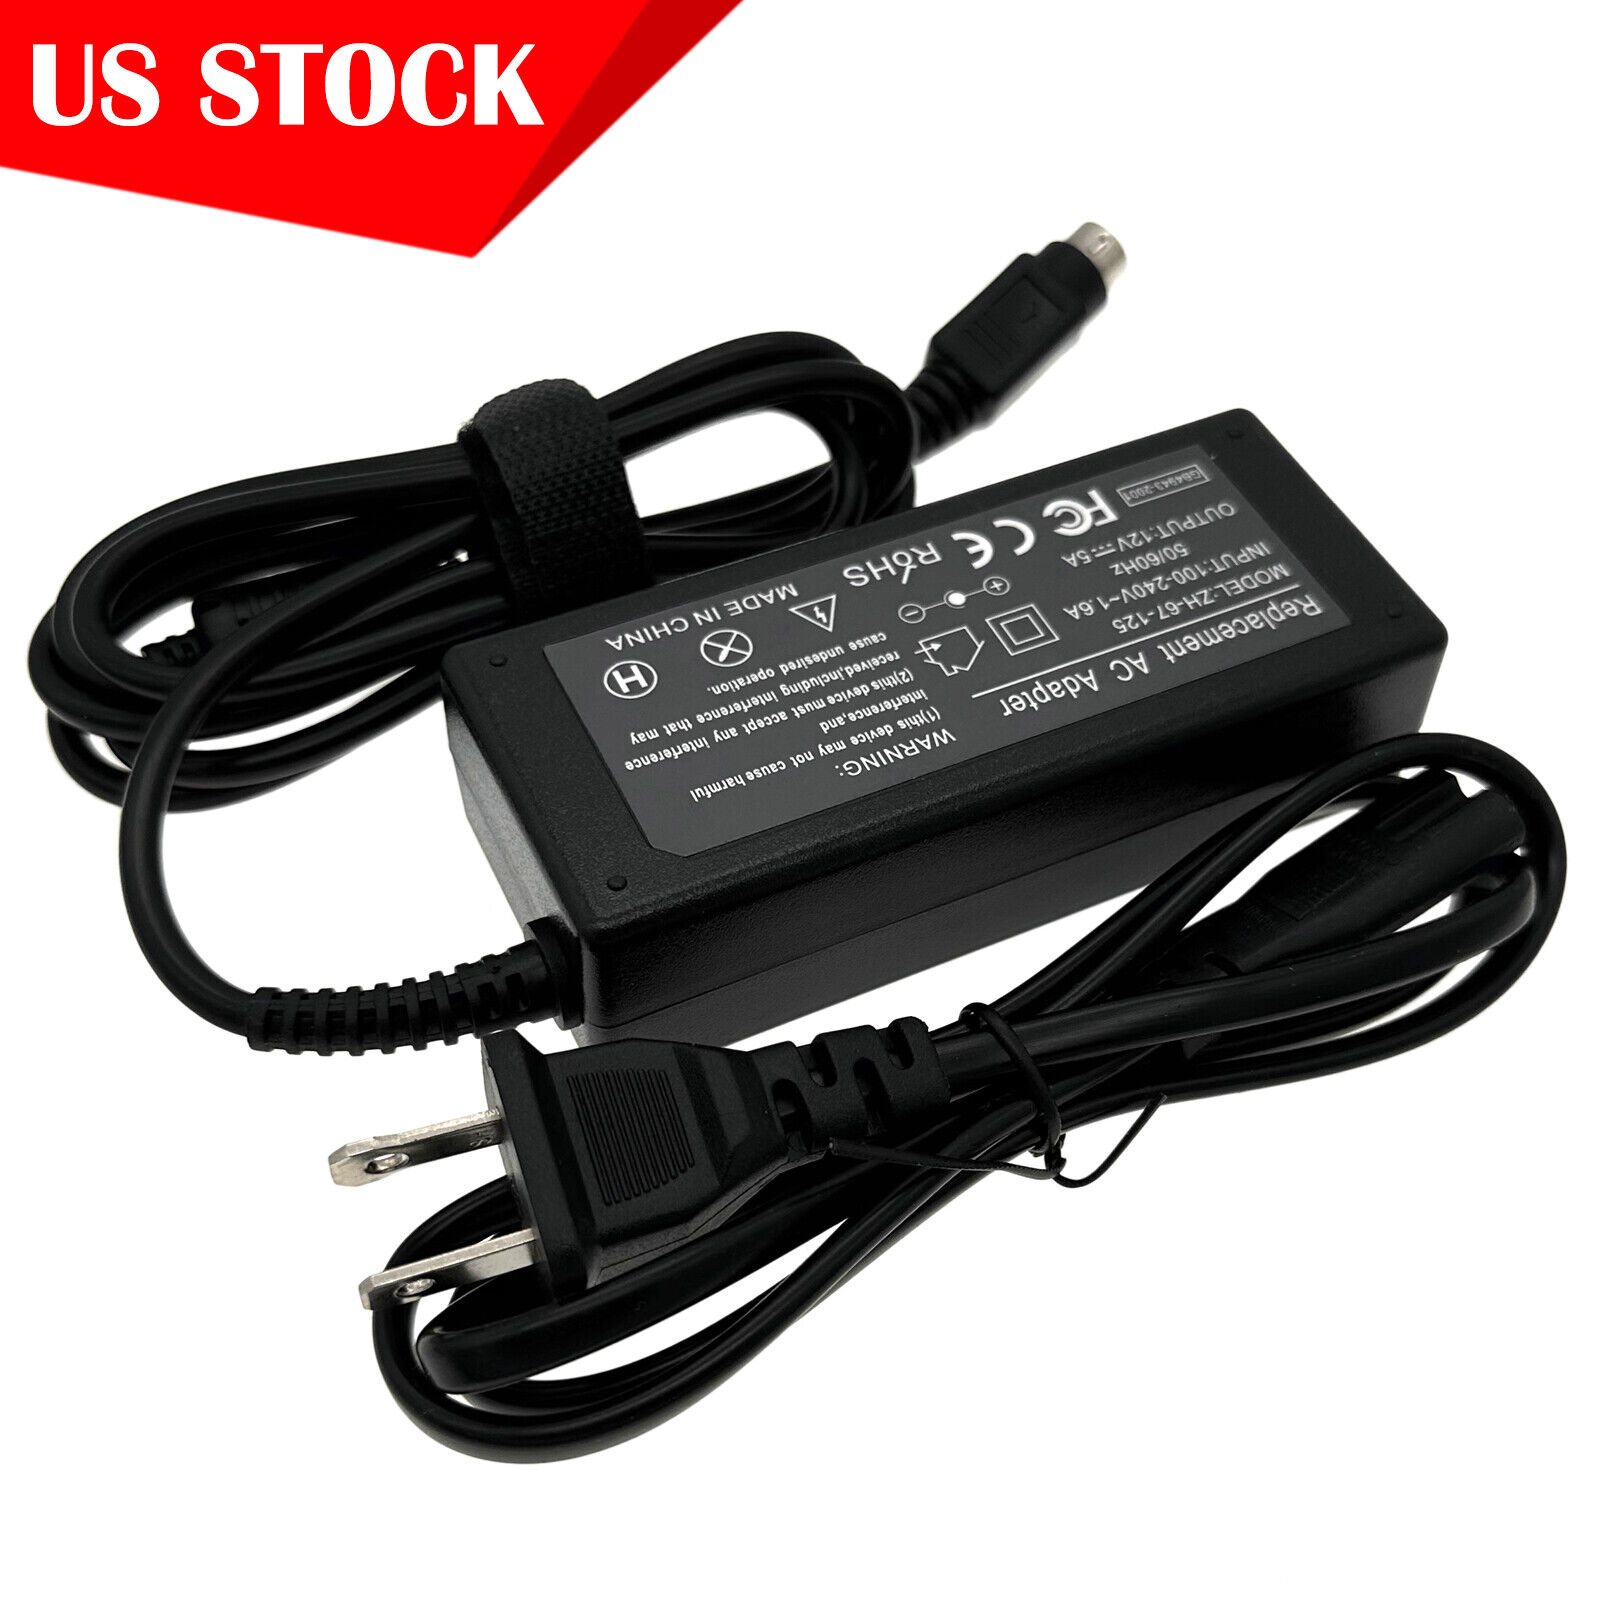 12V 4-Pin DIN AC Power Adapter Charger for Sanyo CLT1554 CLT2054 LCD TV Monitor Brand Unbranded/Generic Bundled Items P - Click Image to Close